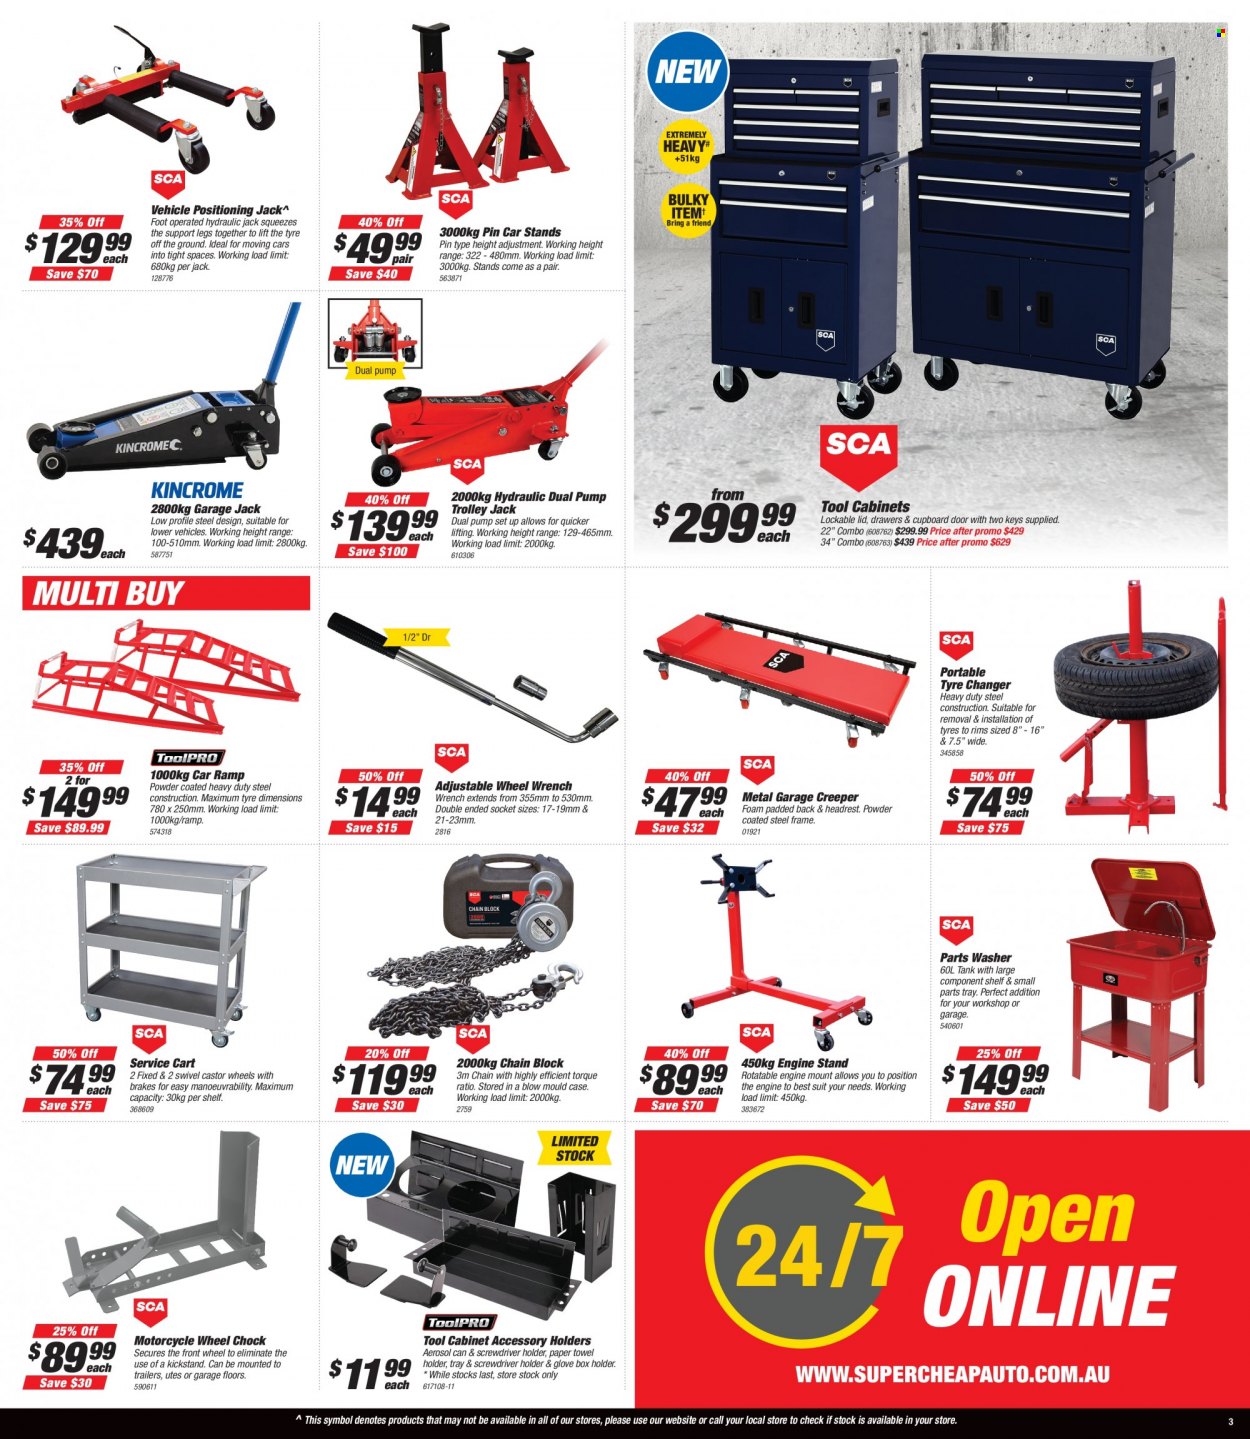 thumbnail - Supercheap Auto Catalogue - 25 Nov 2021 - 5 Dec 2021 - Sales products - trolley, wrench, holder, cabinet, cart, tool cabinets, motorcycle, tyre changer, vehicle positioning jack, tires. Page 3.